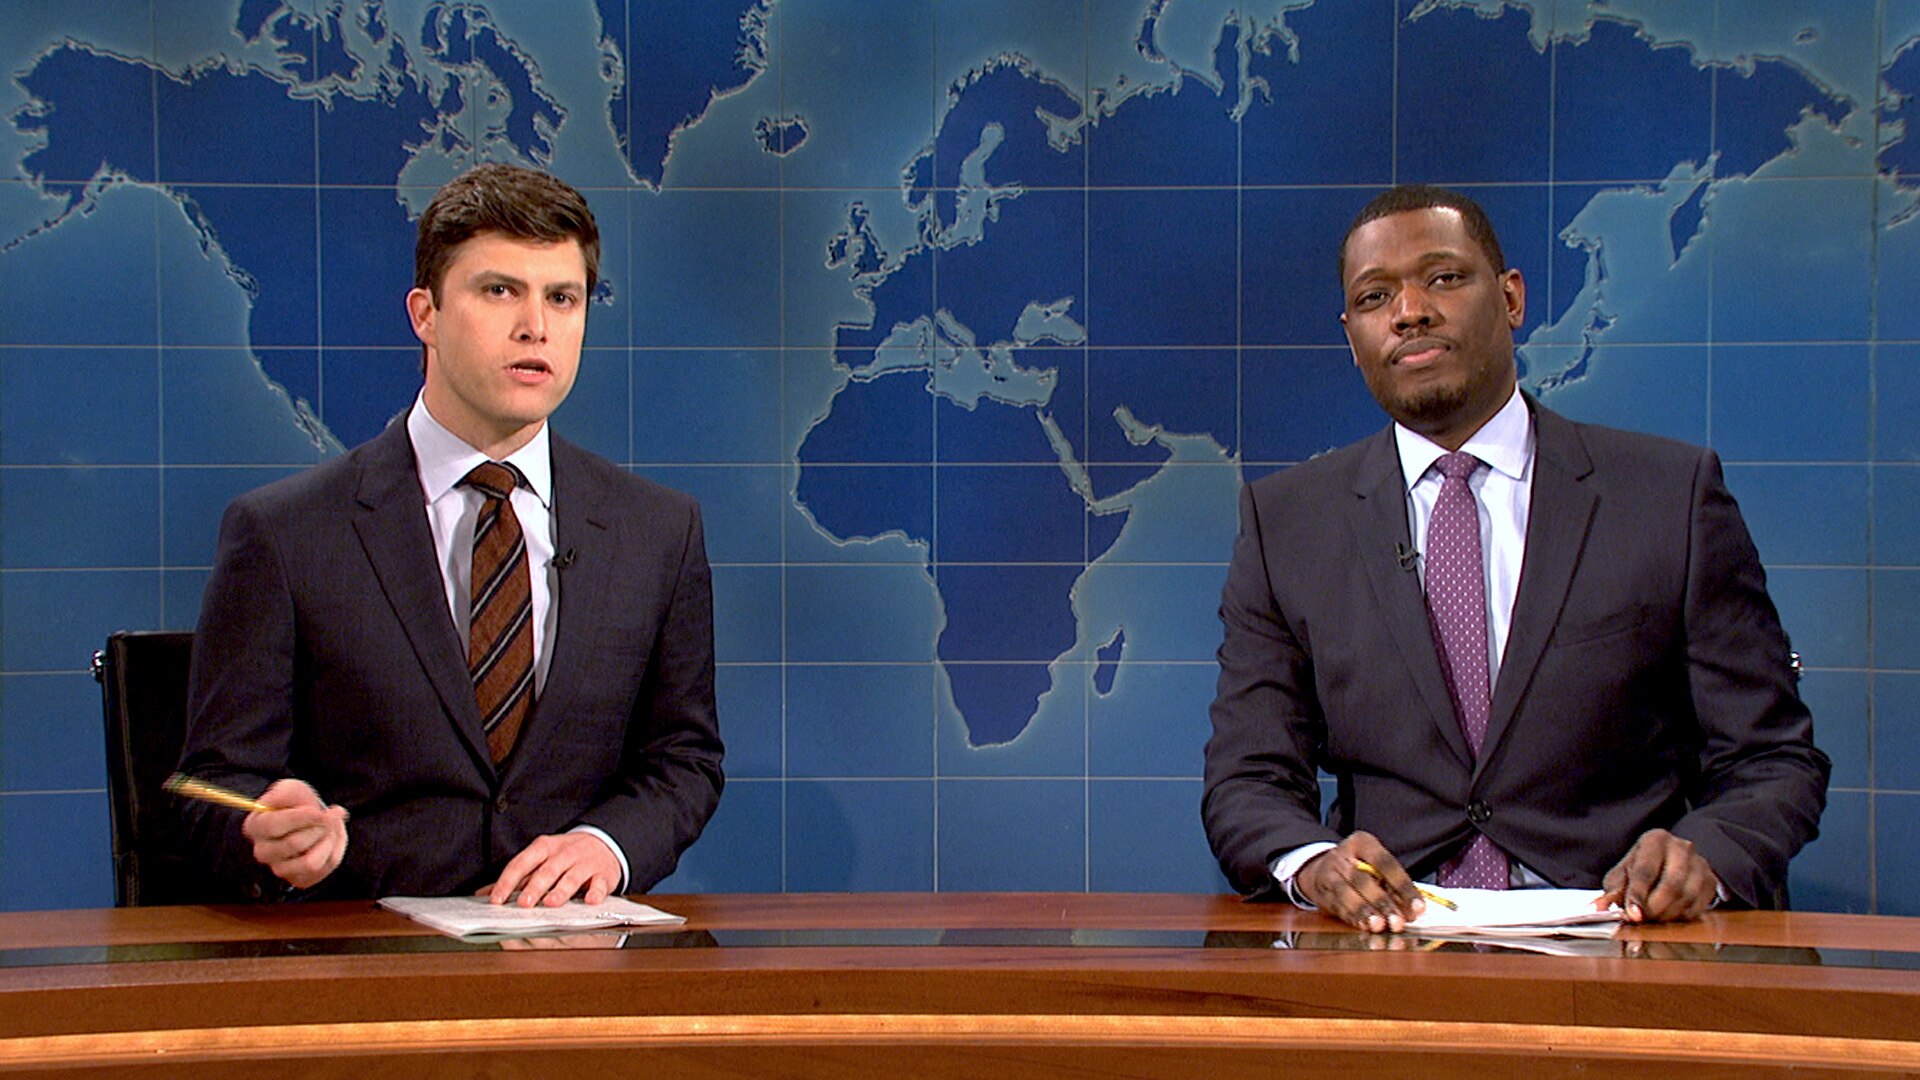 151122 2941770 Weekend Update  Colin Jost And Michael Che O 